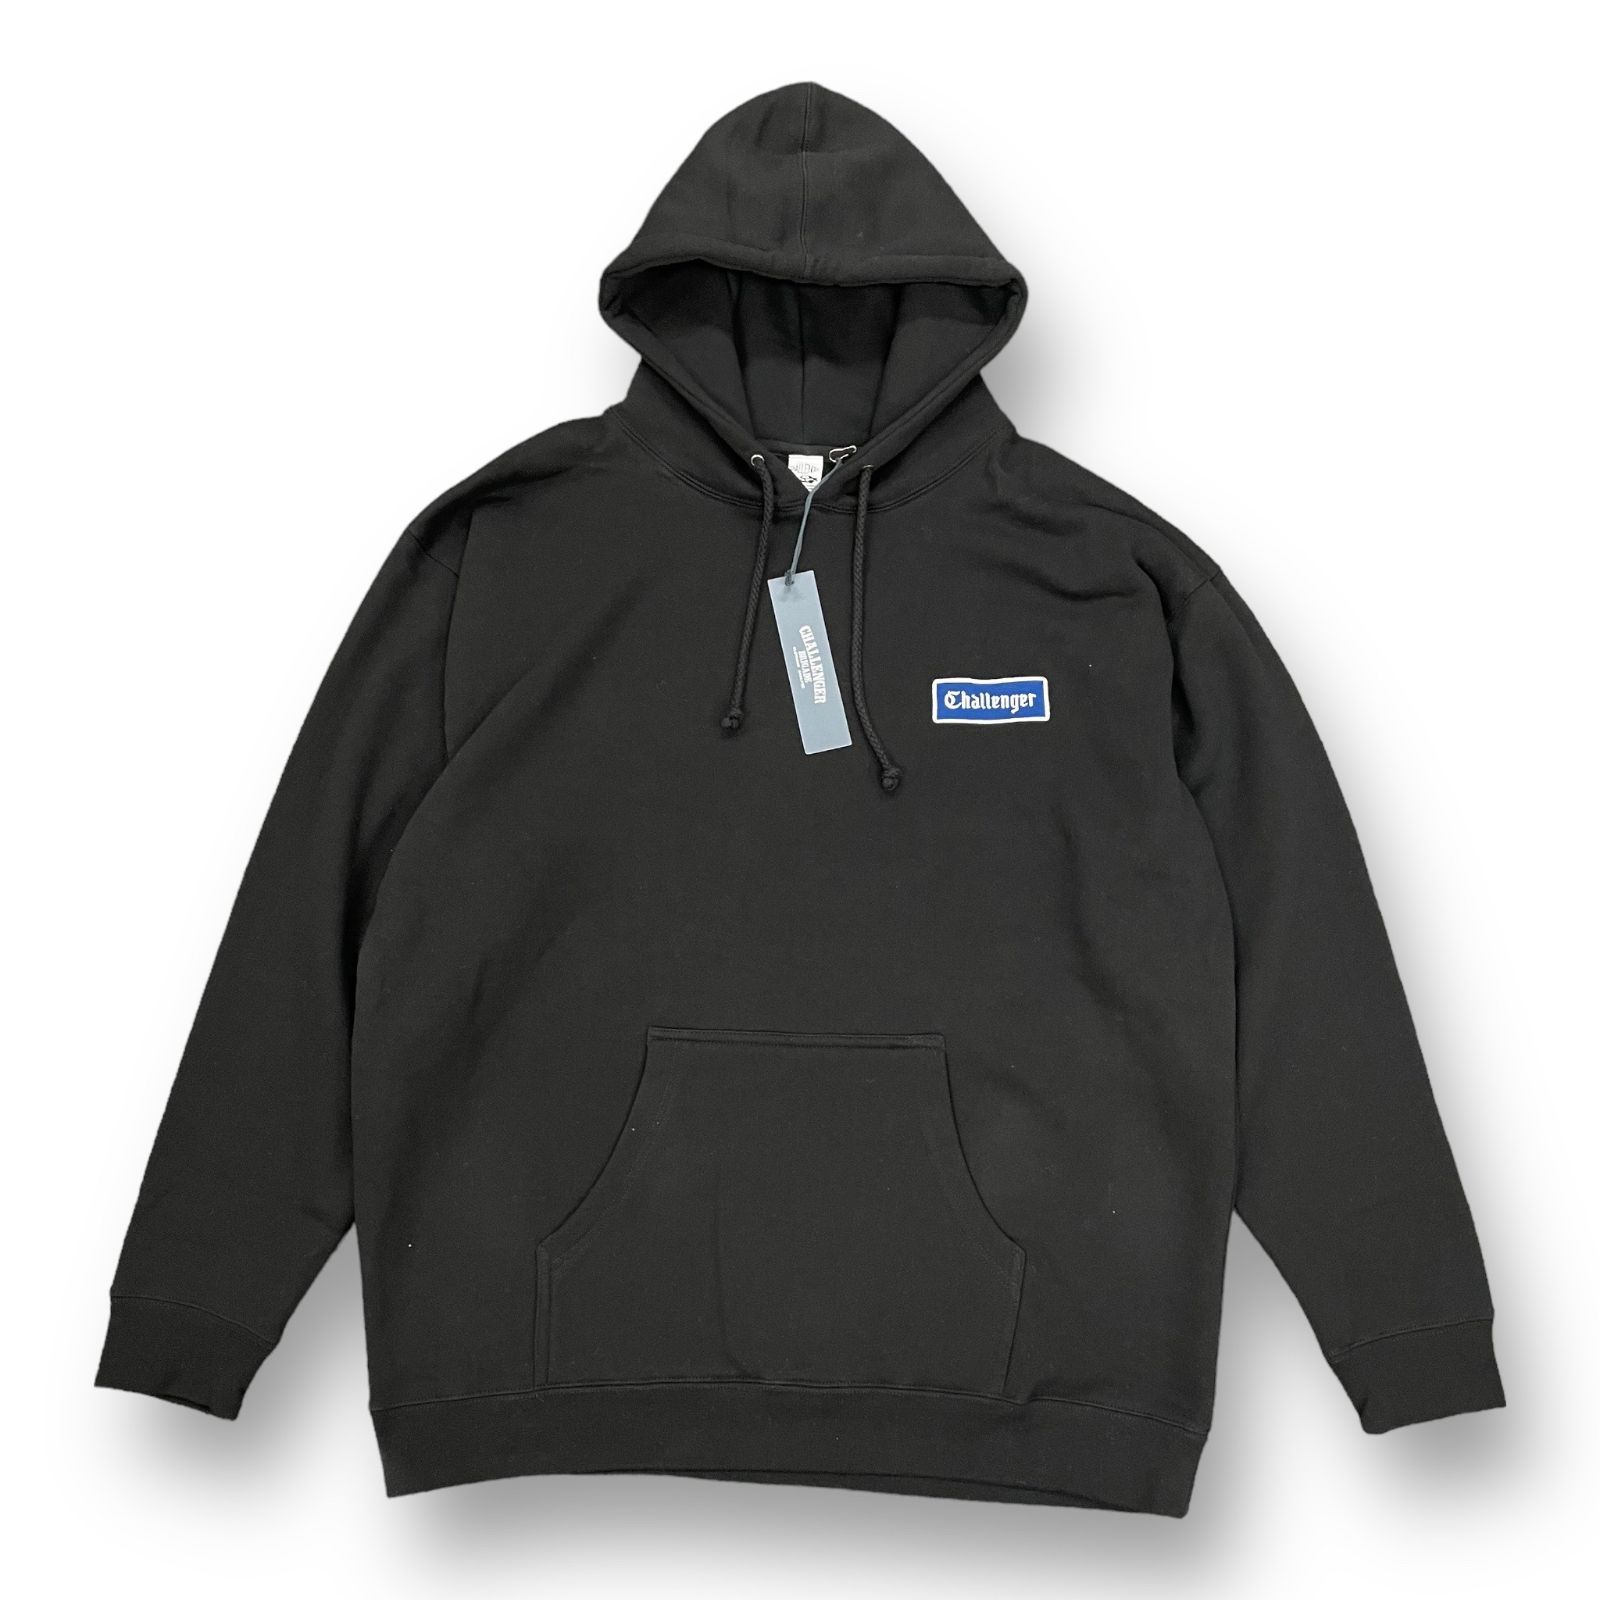 OUTLET 包装 即日発送 代引無料 【XLサイズ】CHALLENGER／LOGO PATCH HOODIE 23ss 